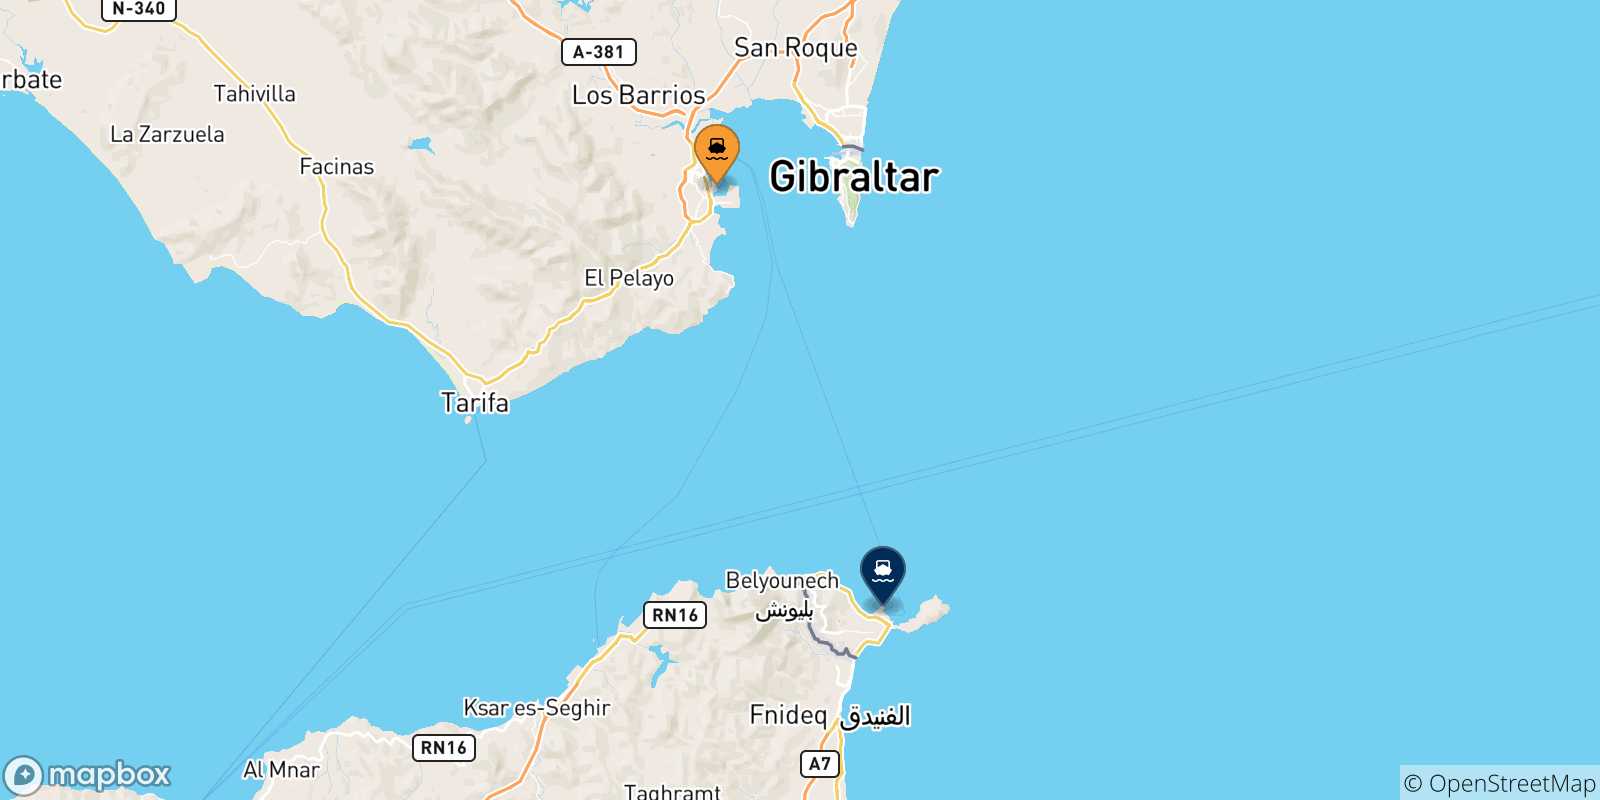 Map of the possible routes between Algeciras and Spain